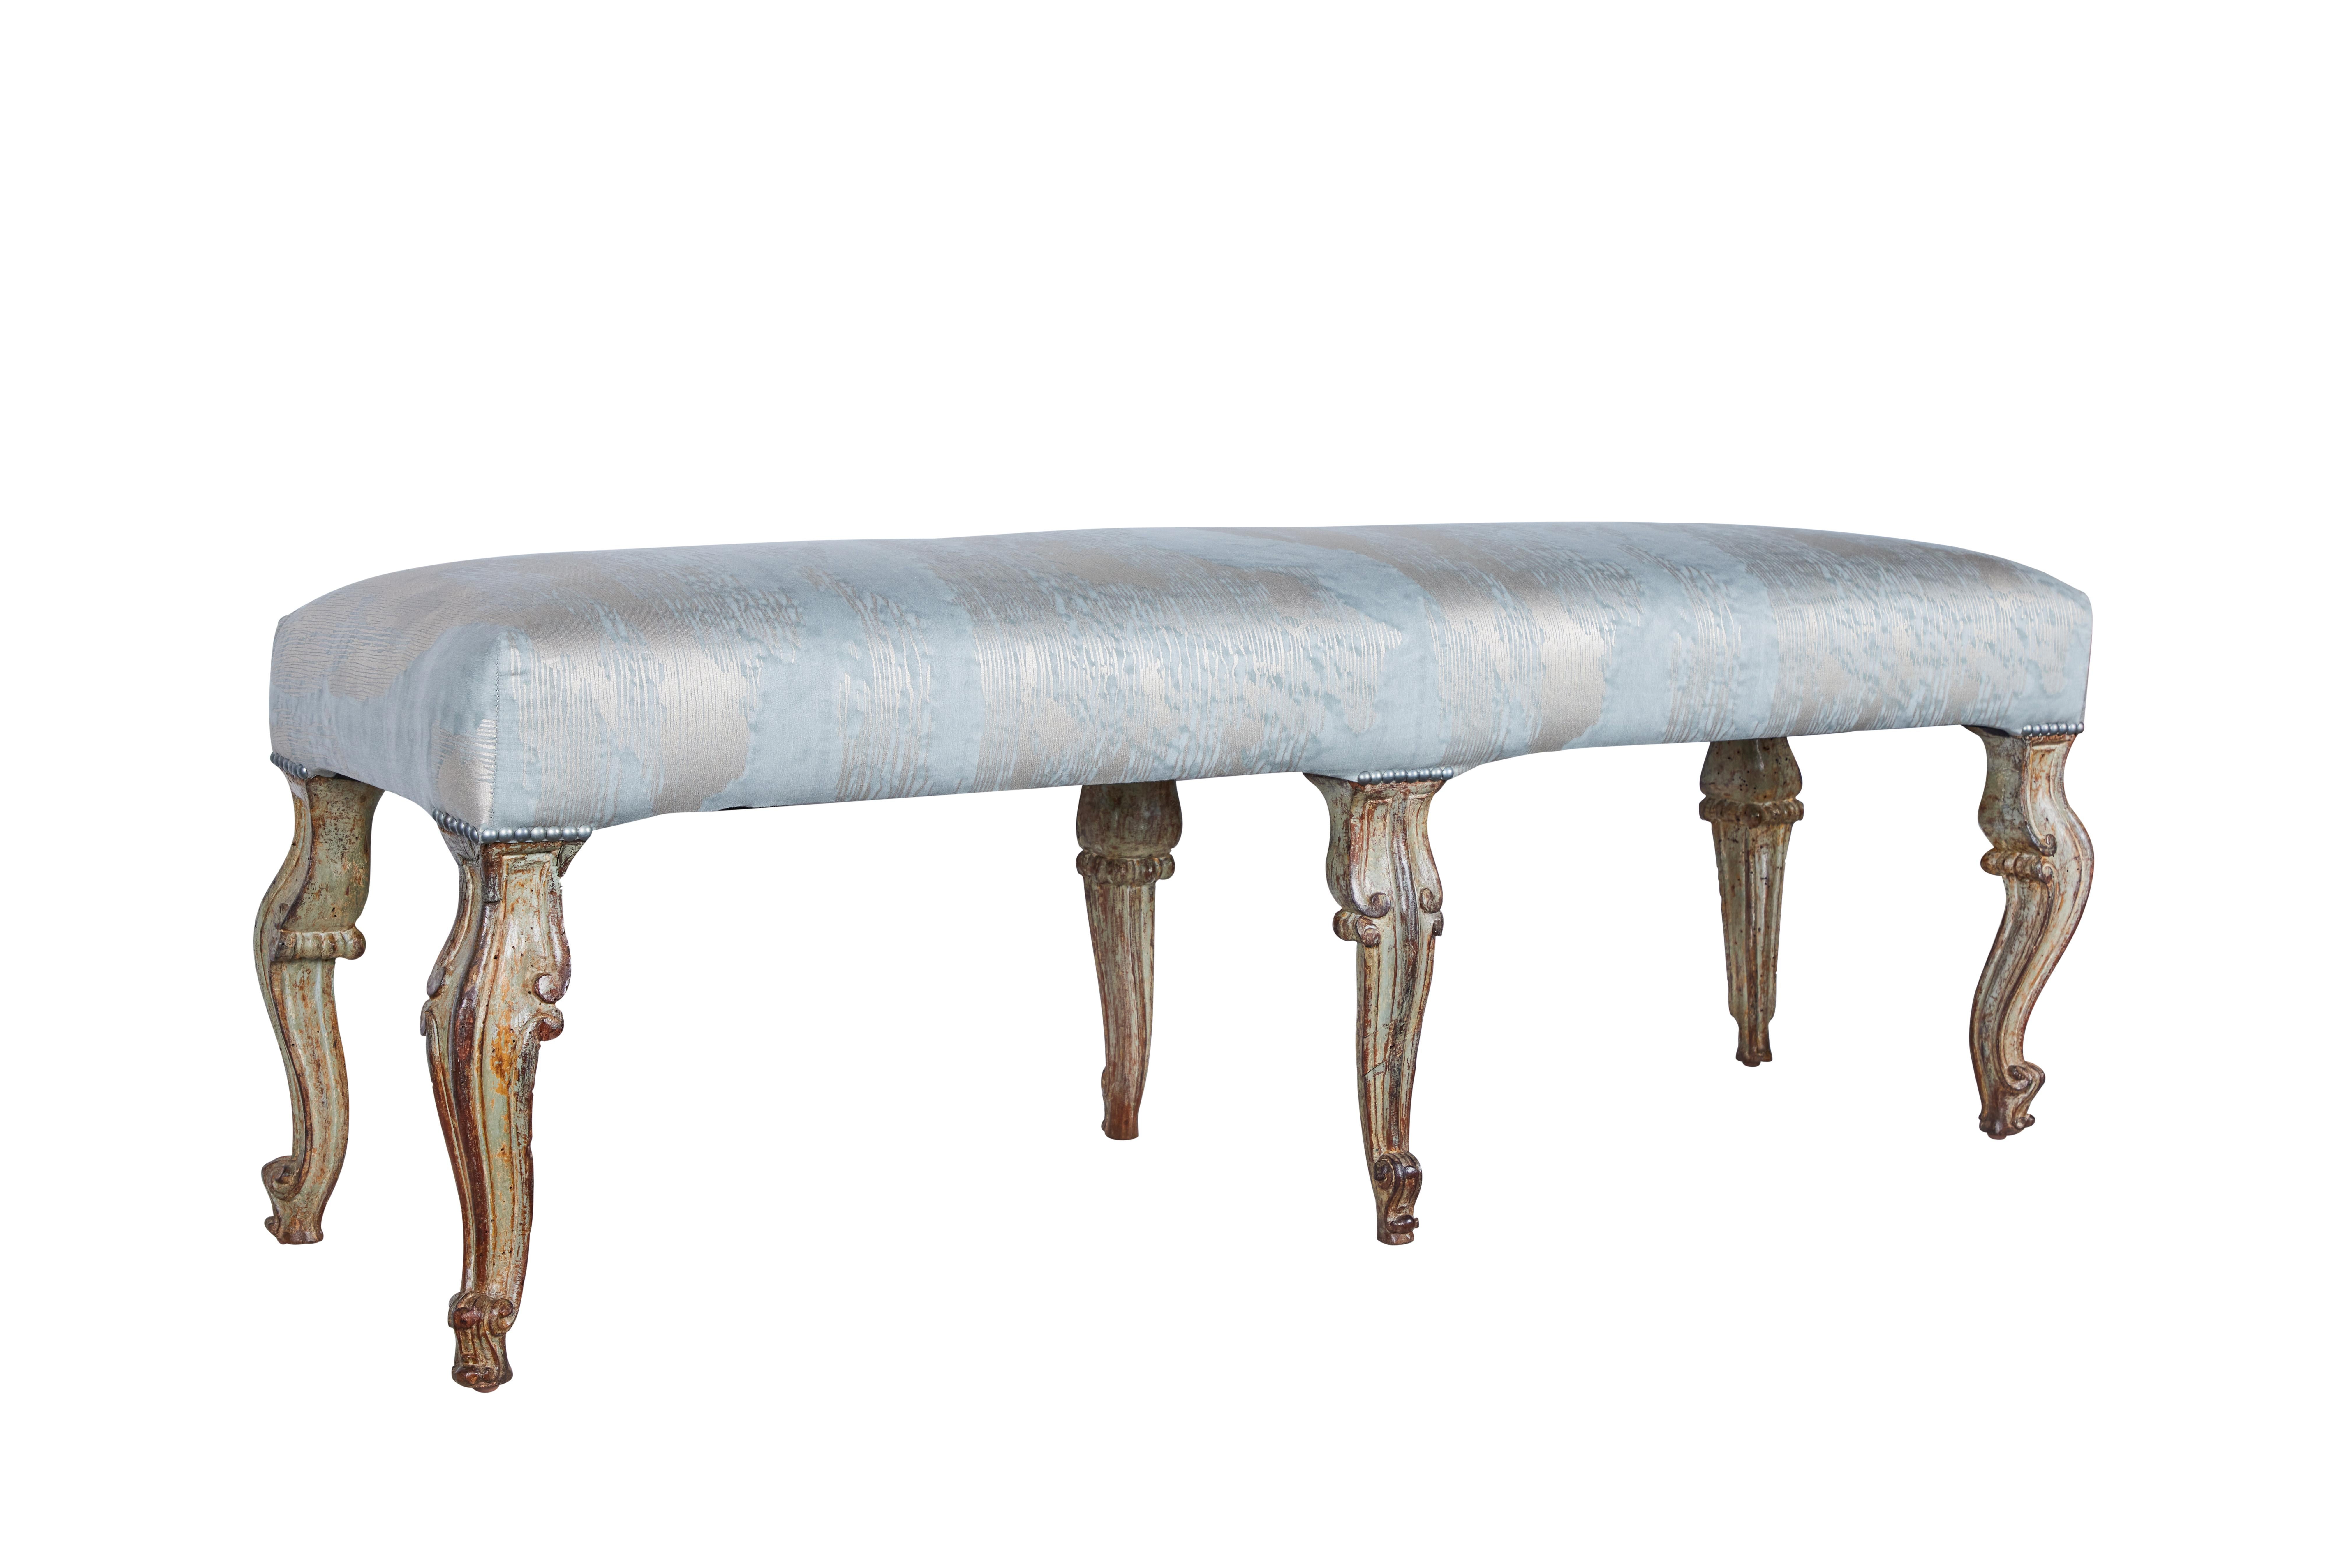 A beautifully hand carved painted and parcel gilt bench, from the Piedmont District of Italy. New Fortuny upholstery.